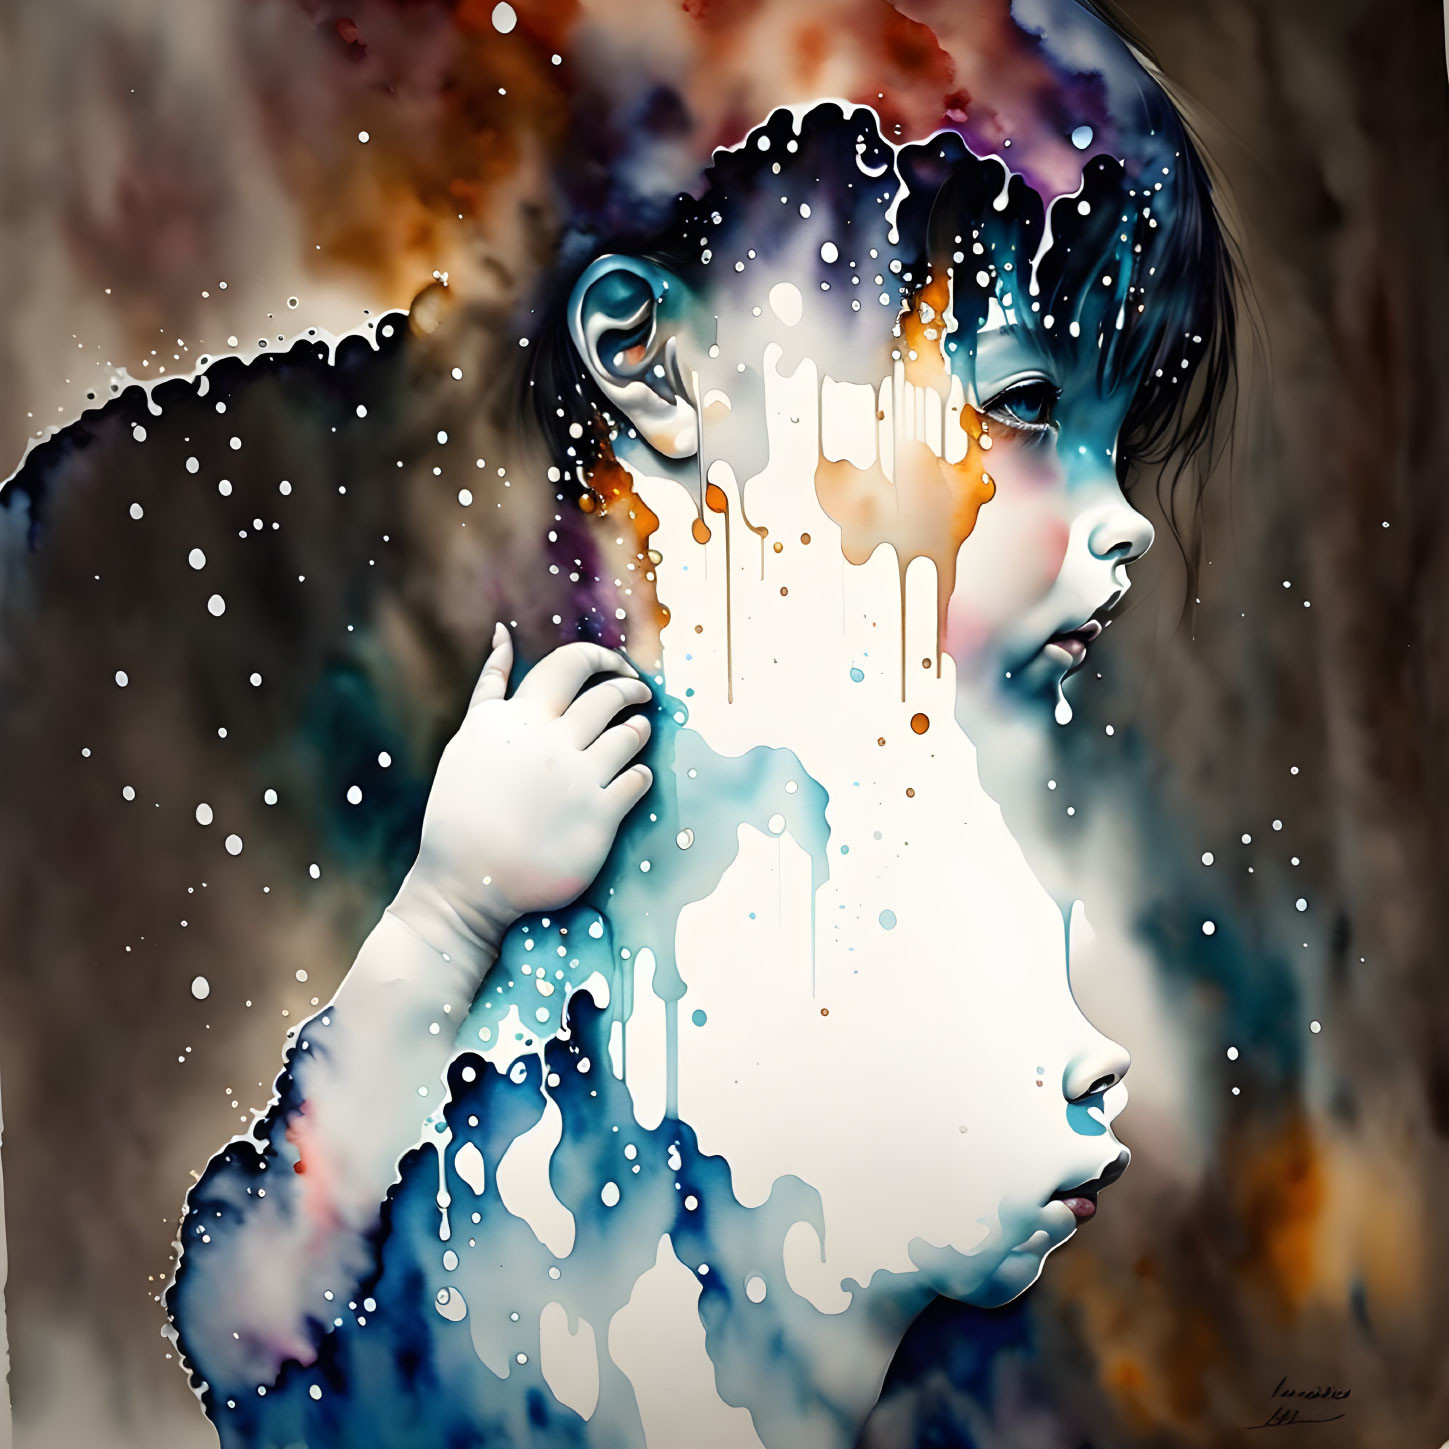 Colorful digital artwork: Girl with melting effects, abstract-realistic blend on speckled background